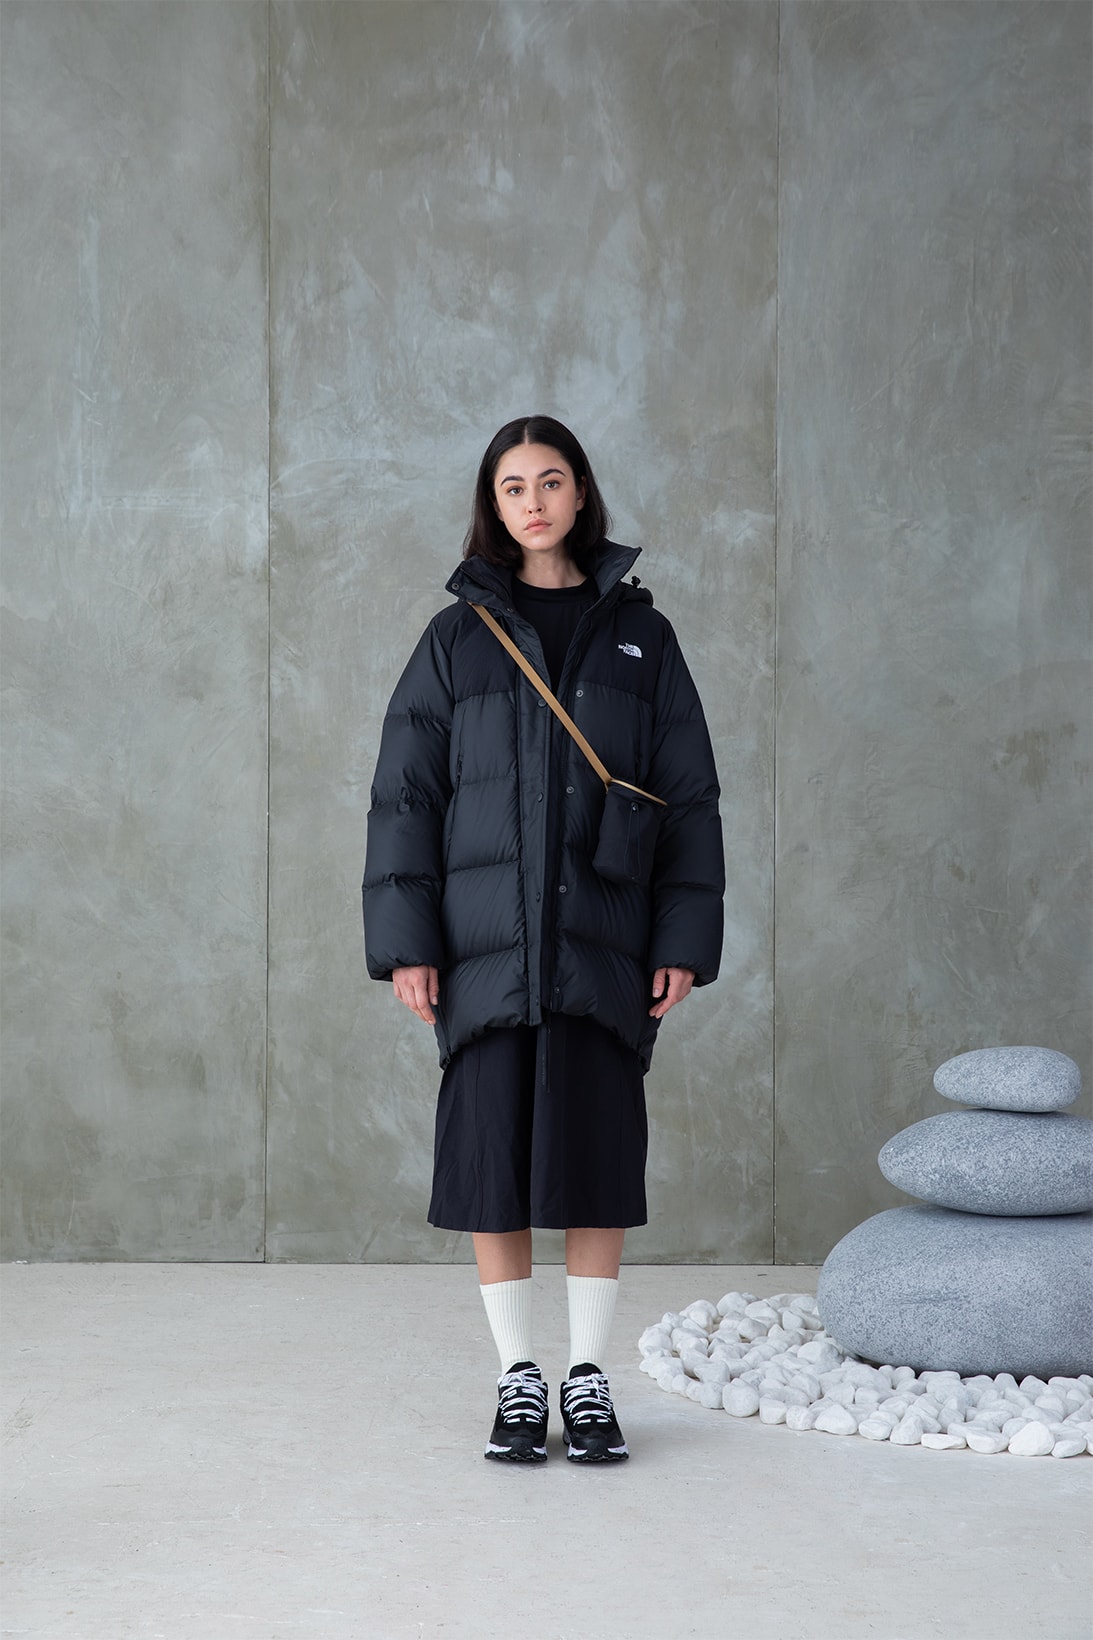 The North Face Urban Exploration Elegance Collection Fall Winter 2021 FW21 Outdoor Clothing Jacket Skirt